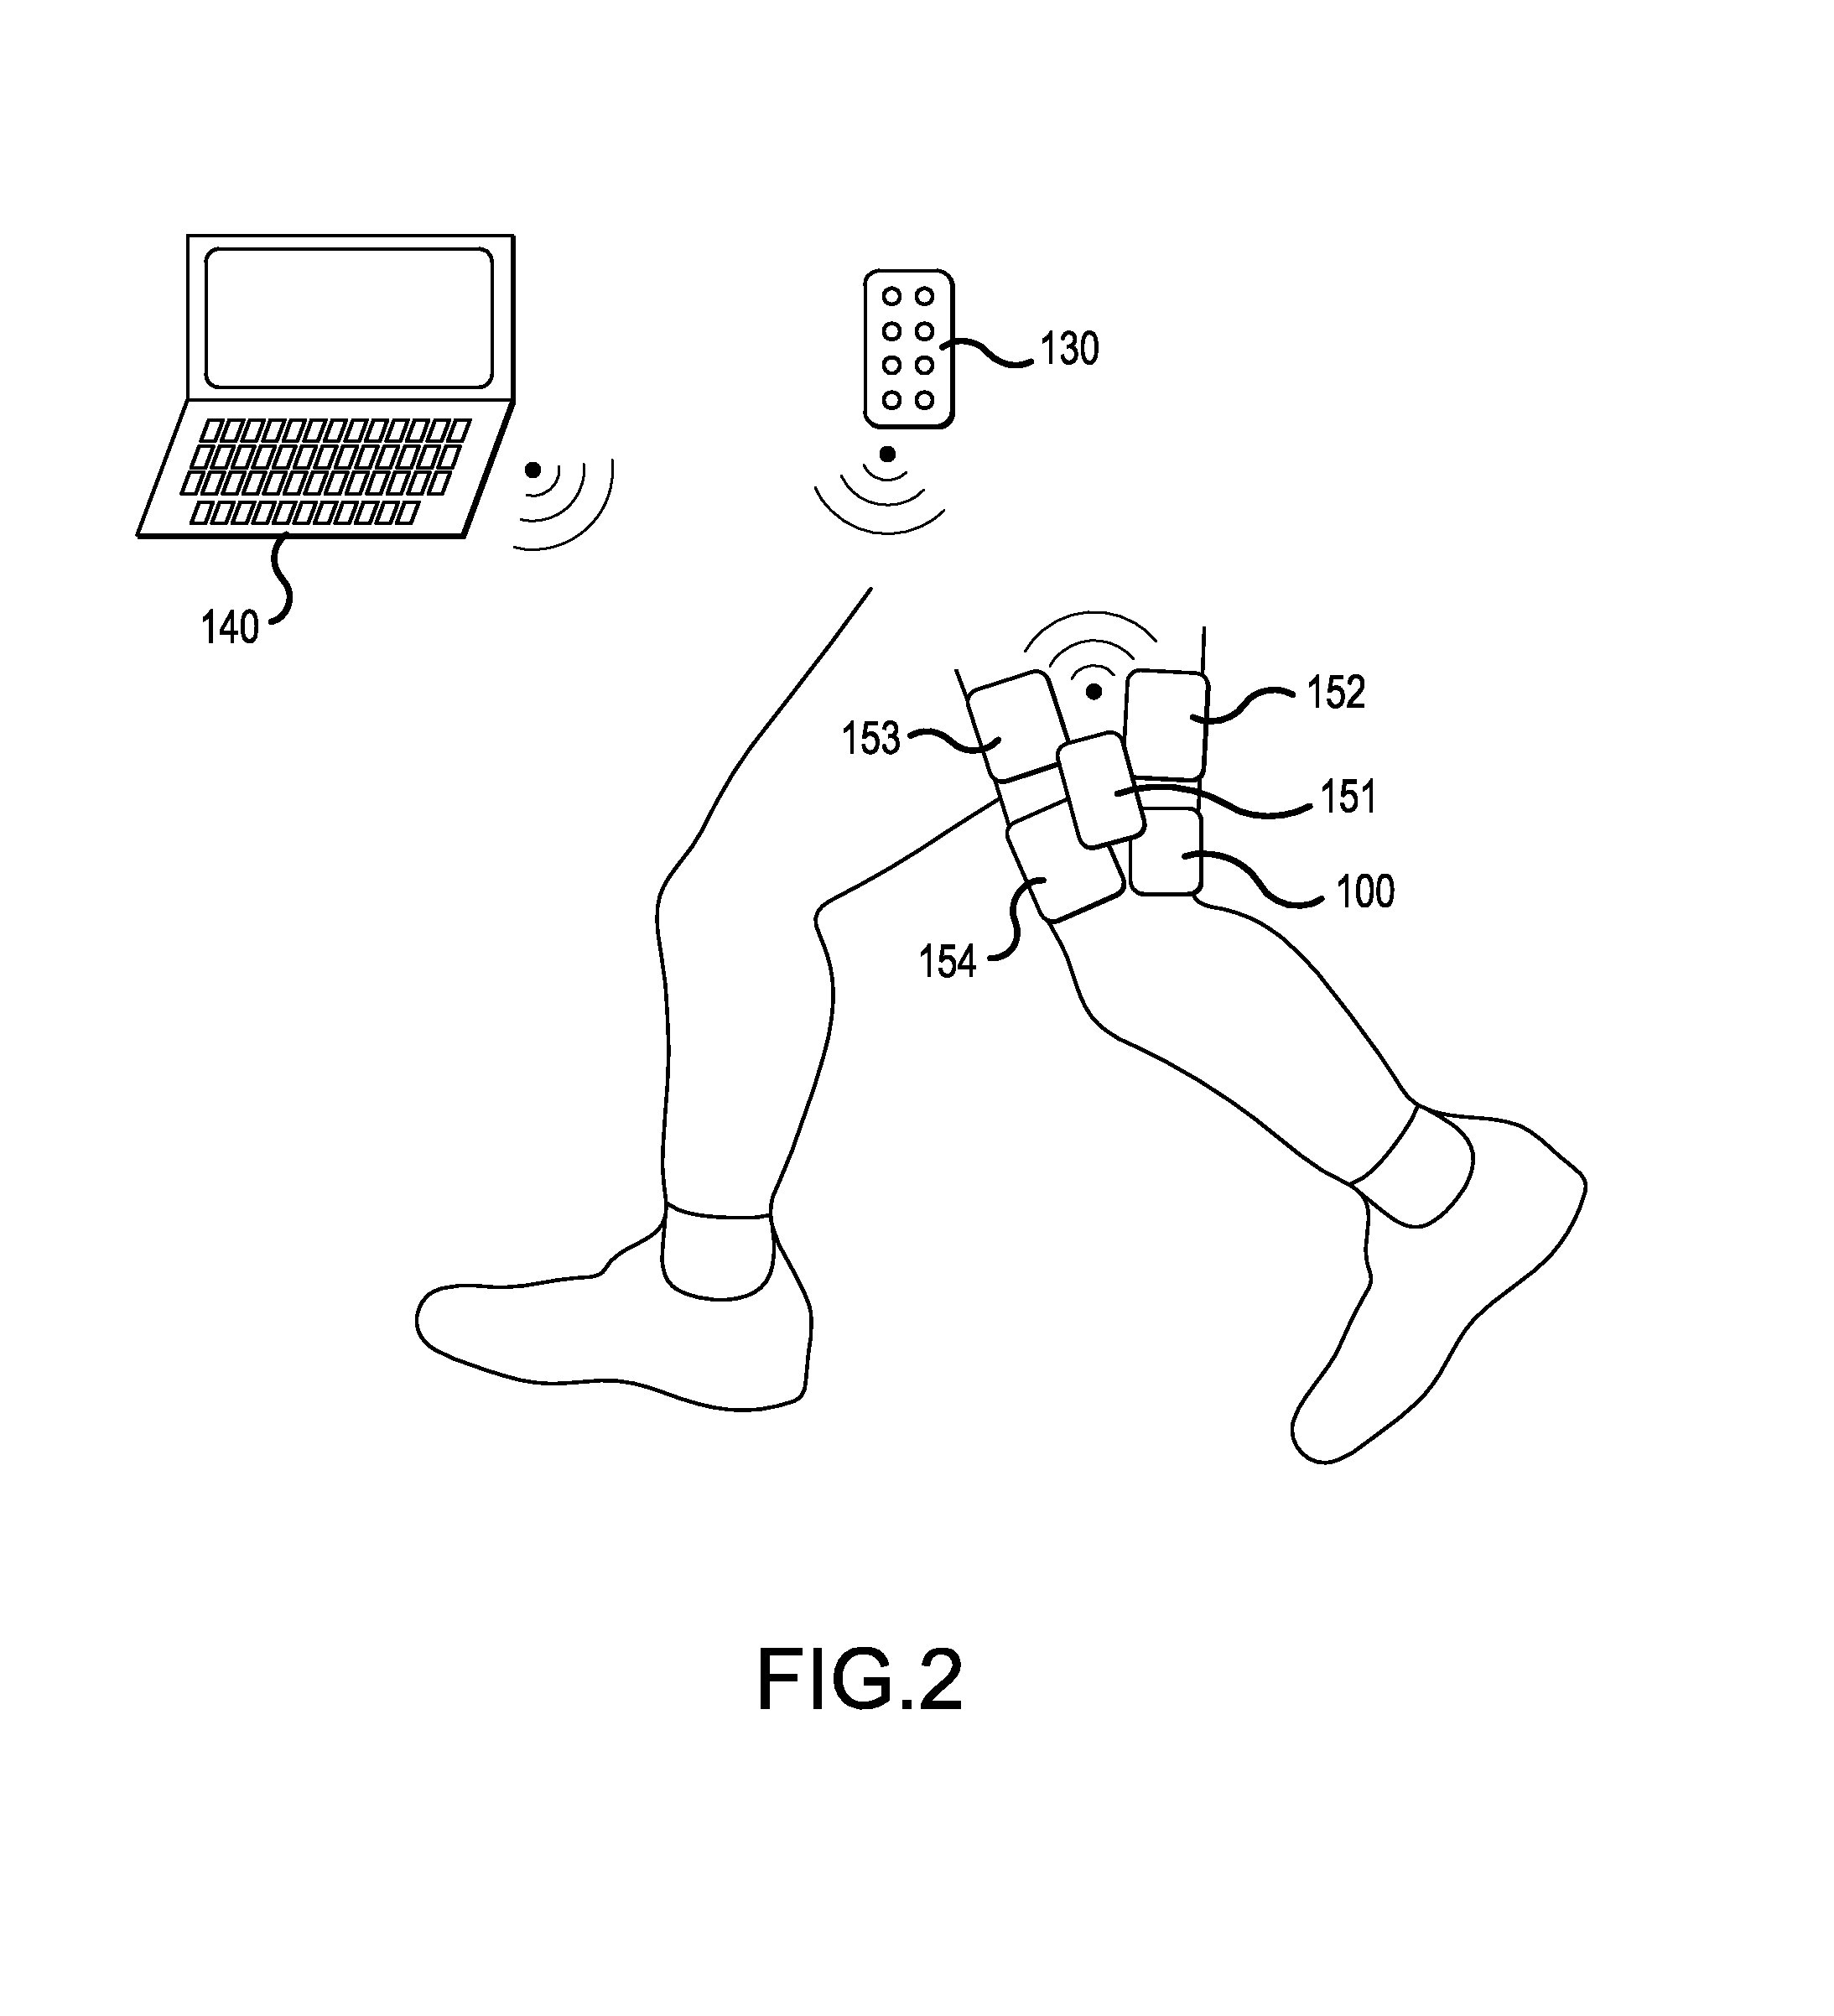 Functional electrical stimulation (FES) method and system to improve walking and other locomotion functions